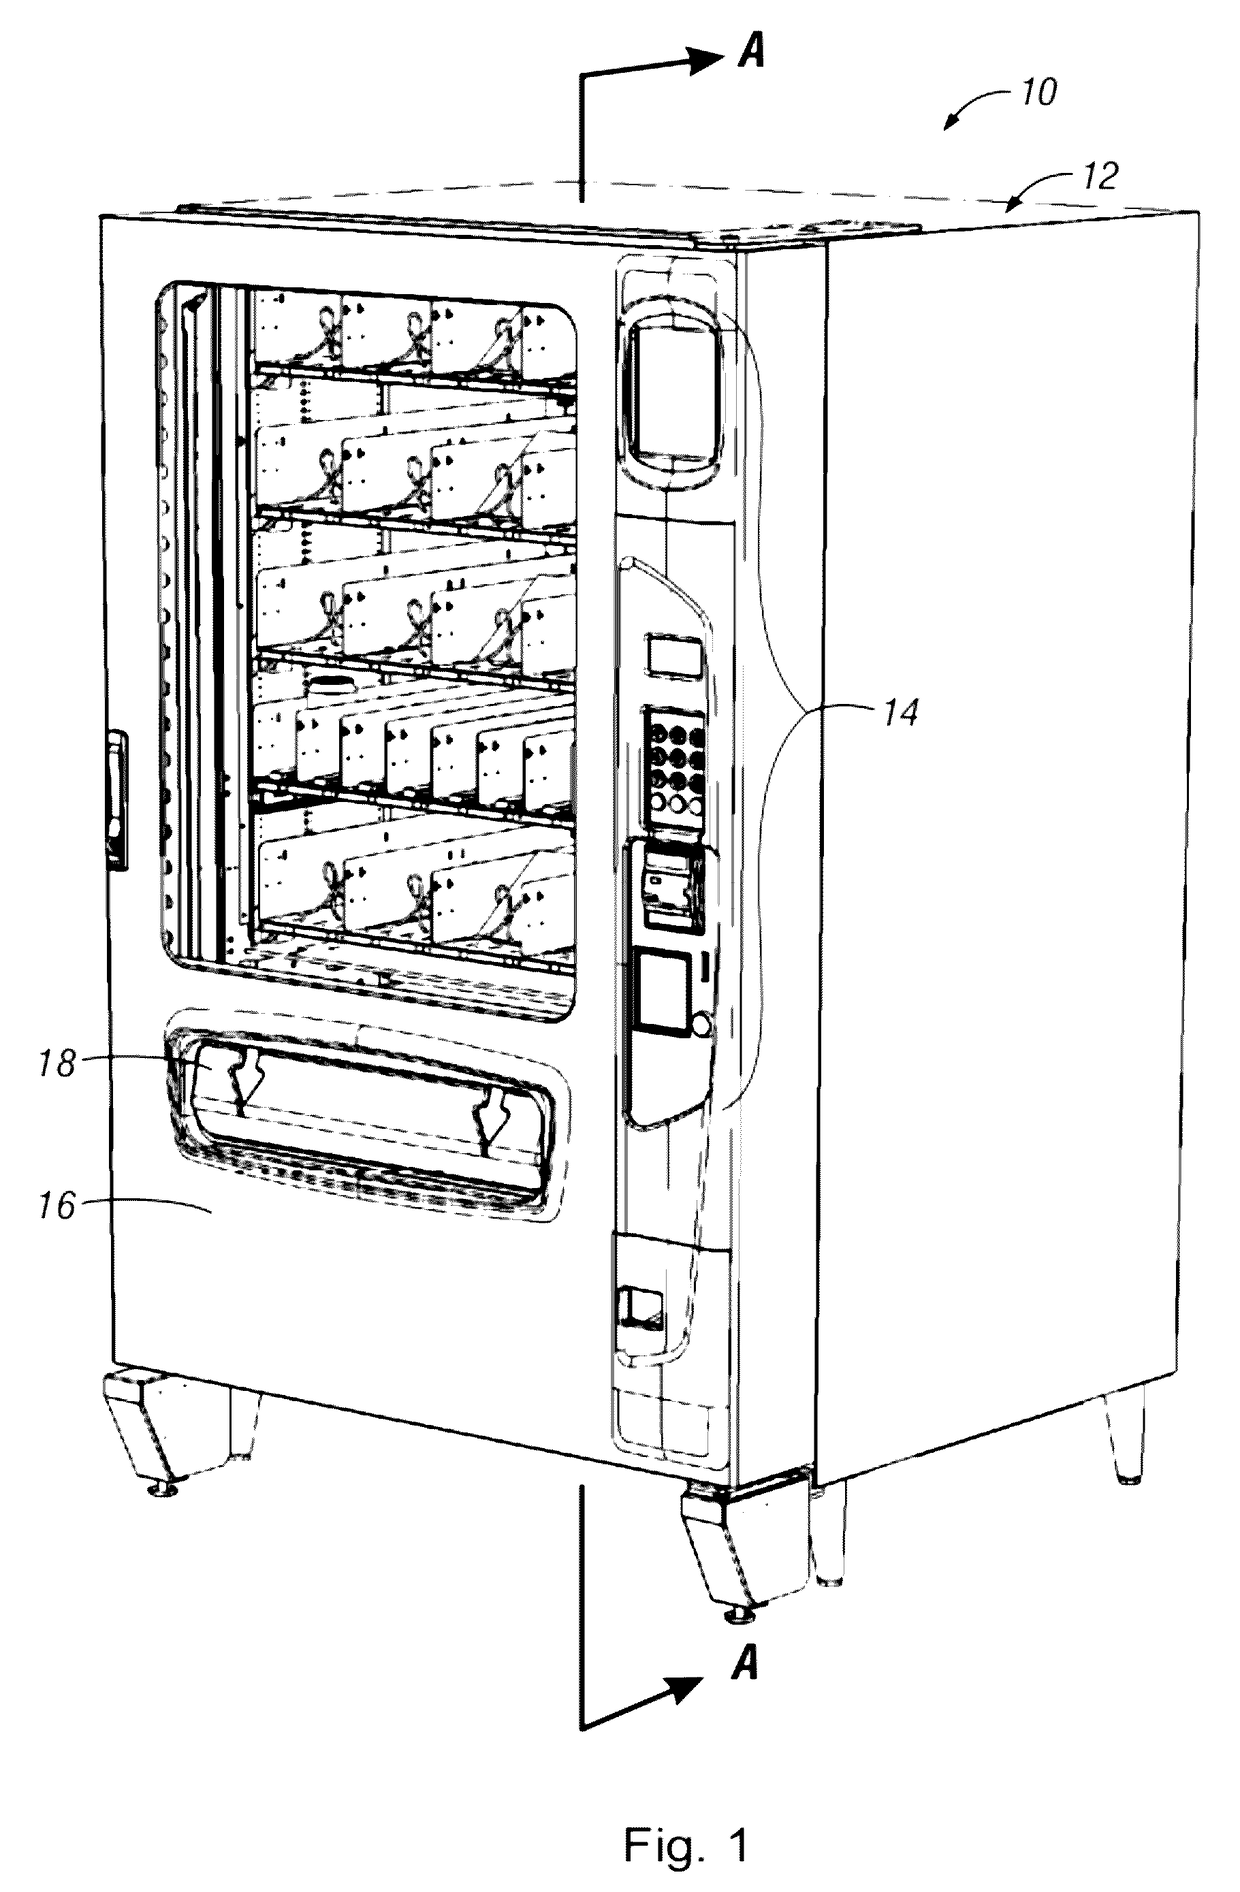 Vending machine with elevator delivery of vended product to customer access